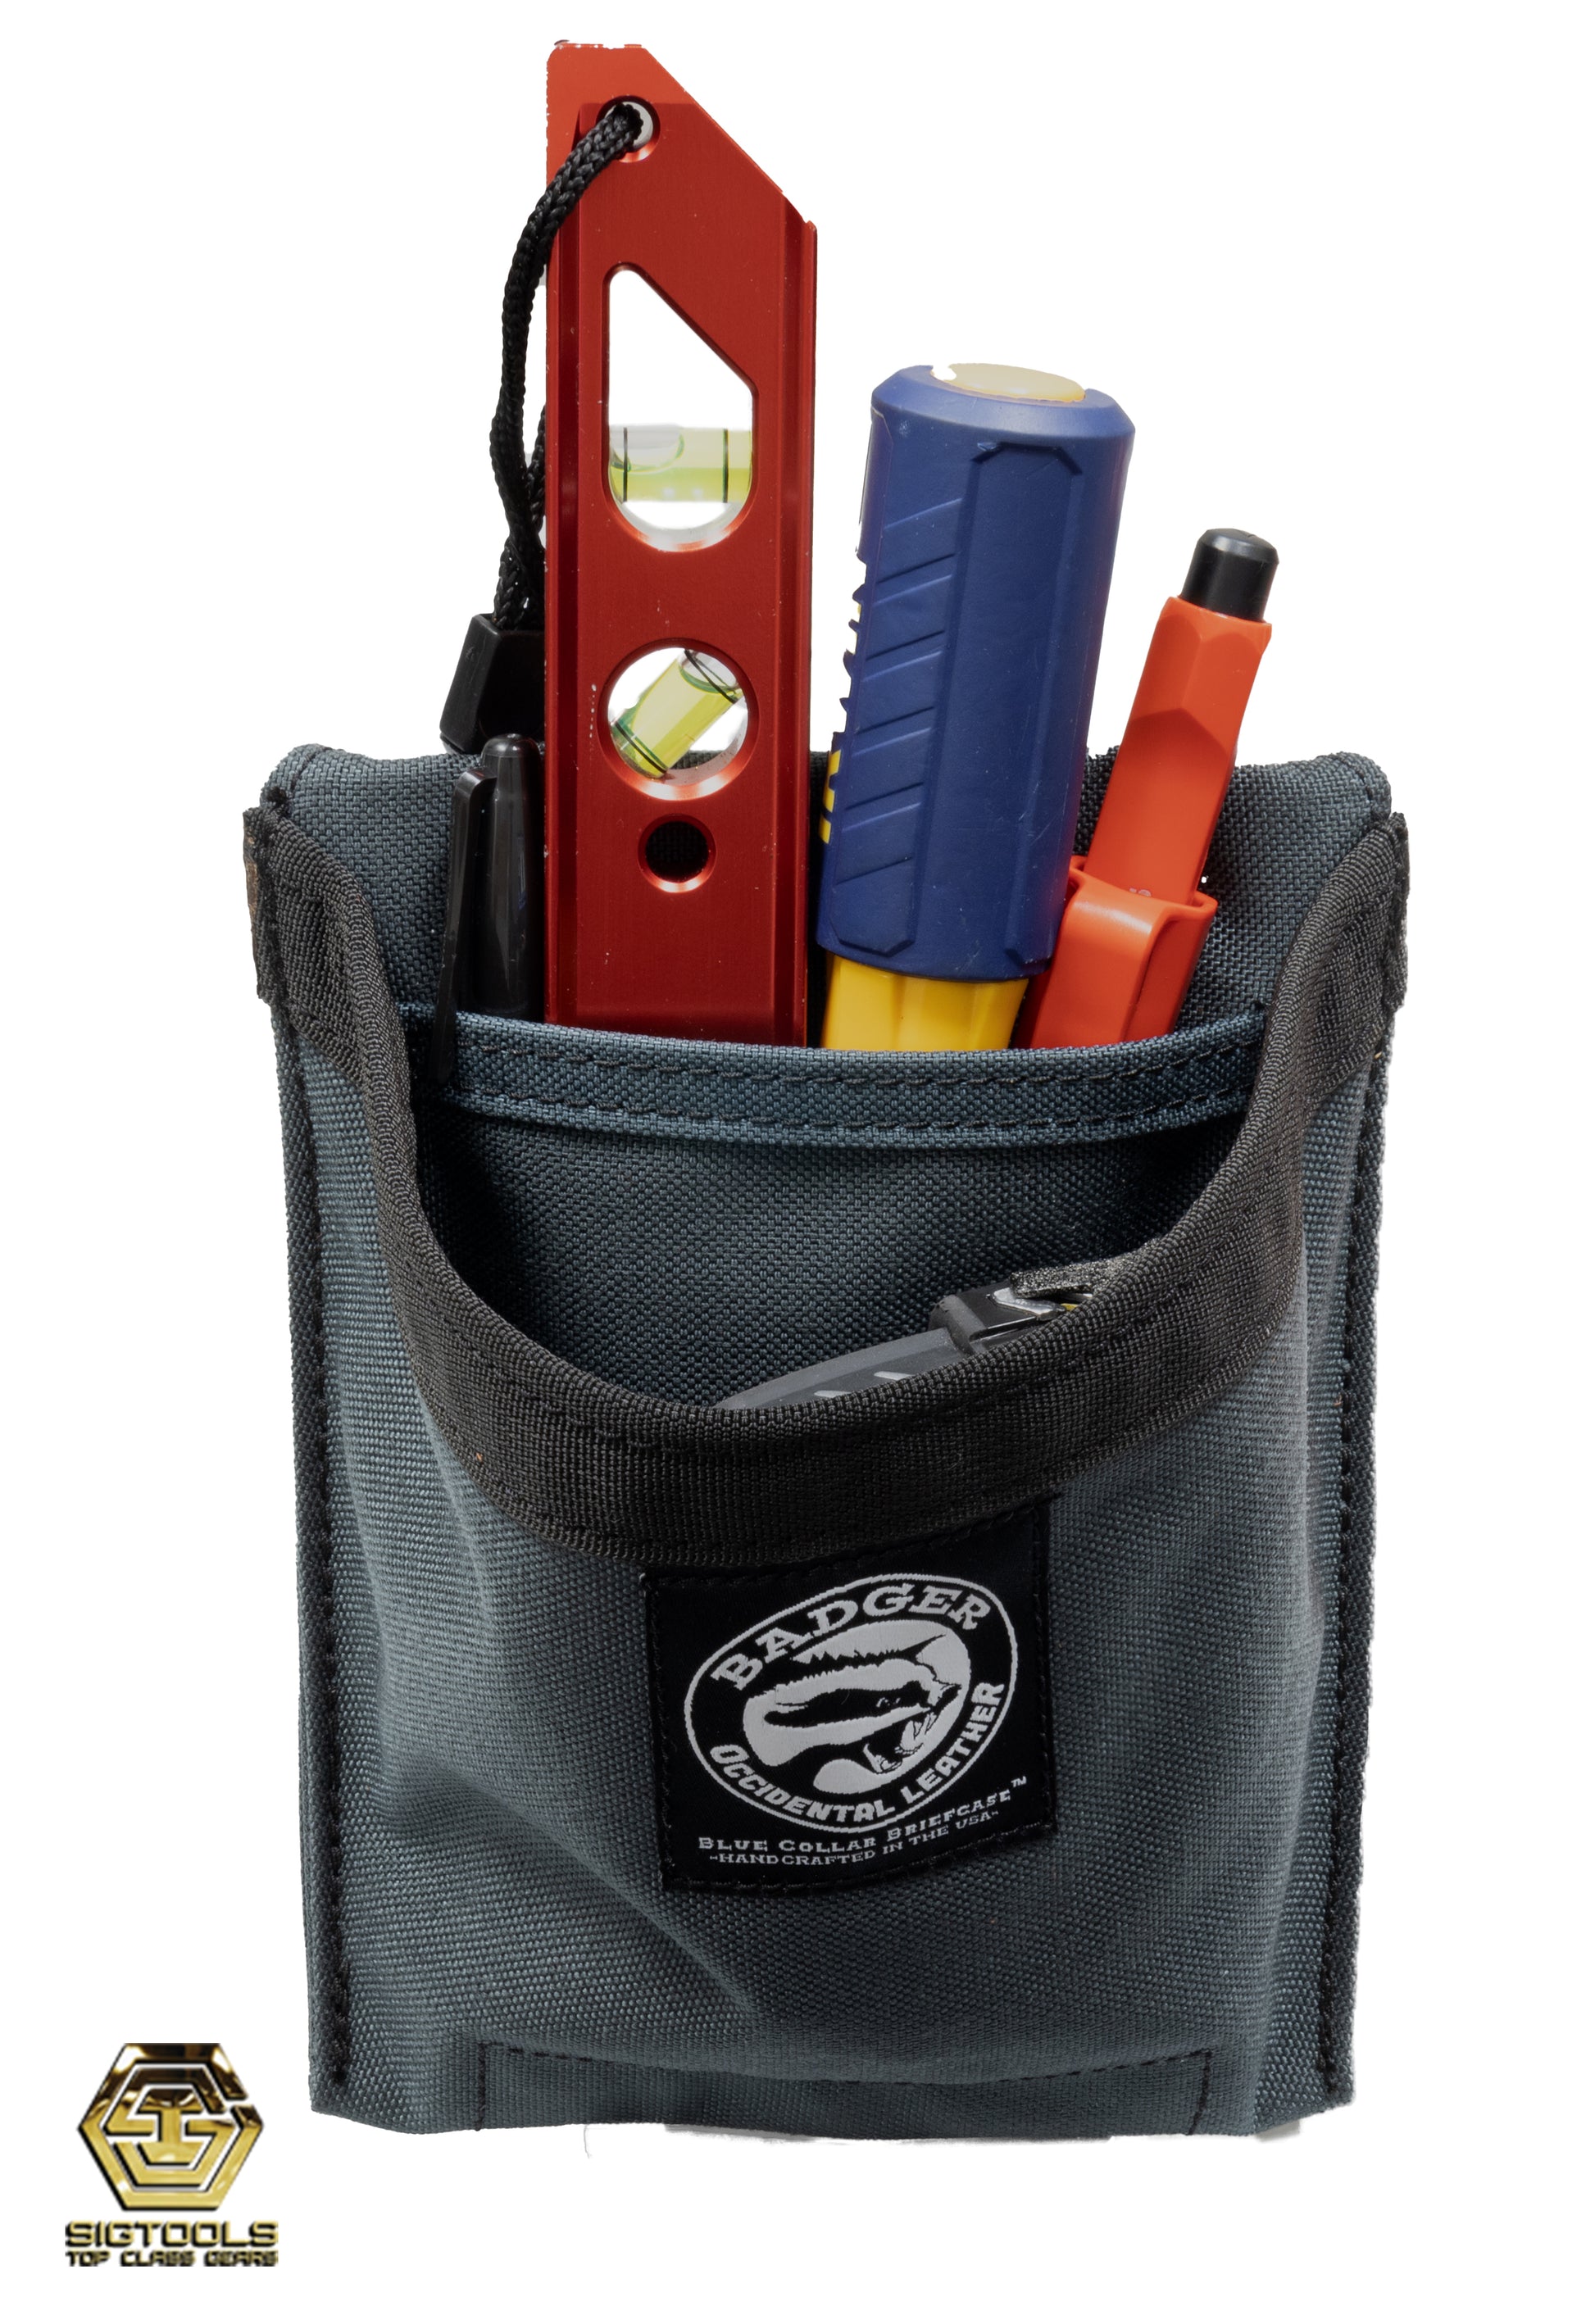 A Gunmetal Grey tool pouch from Badger, filled with tools and accessories, ready for efficient and organized use.